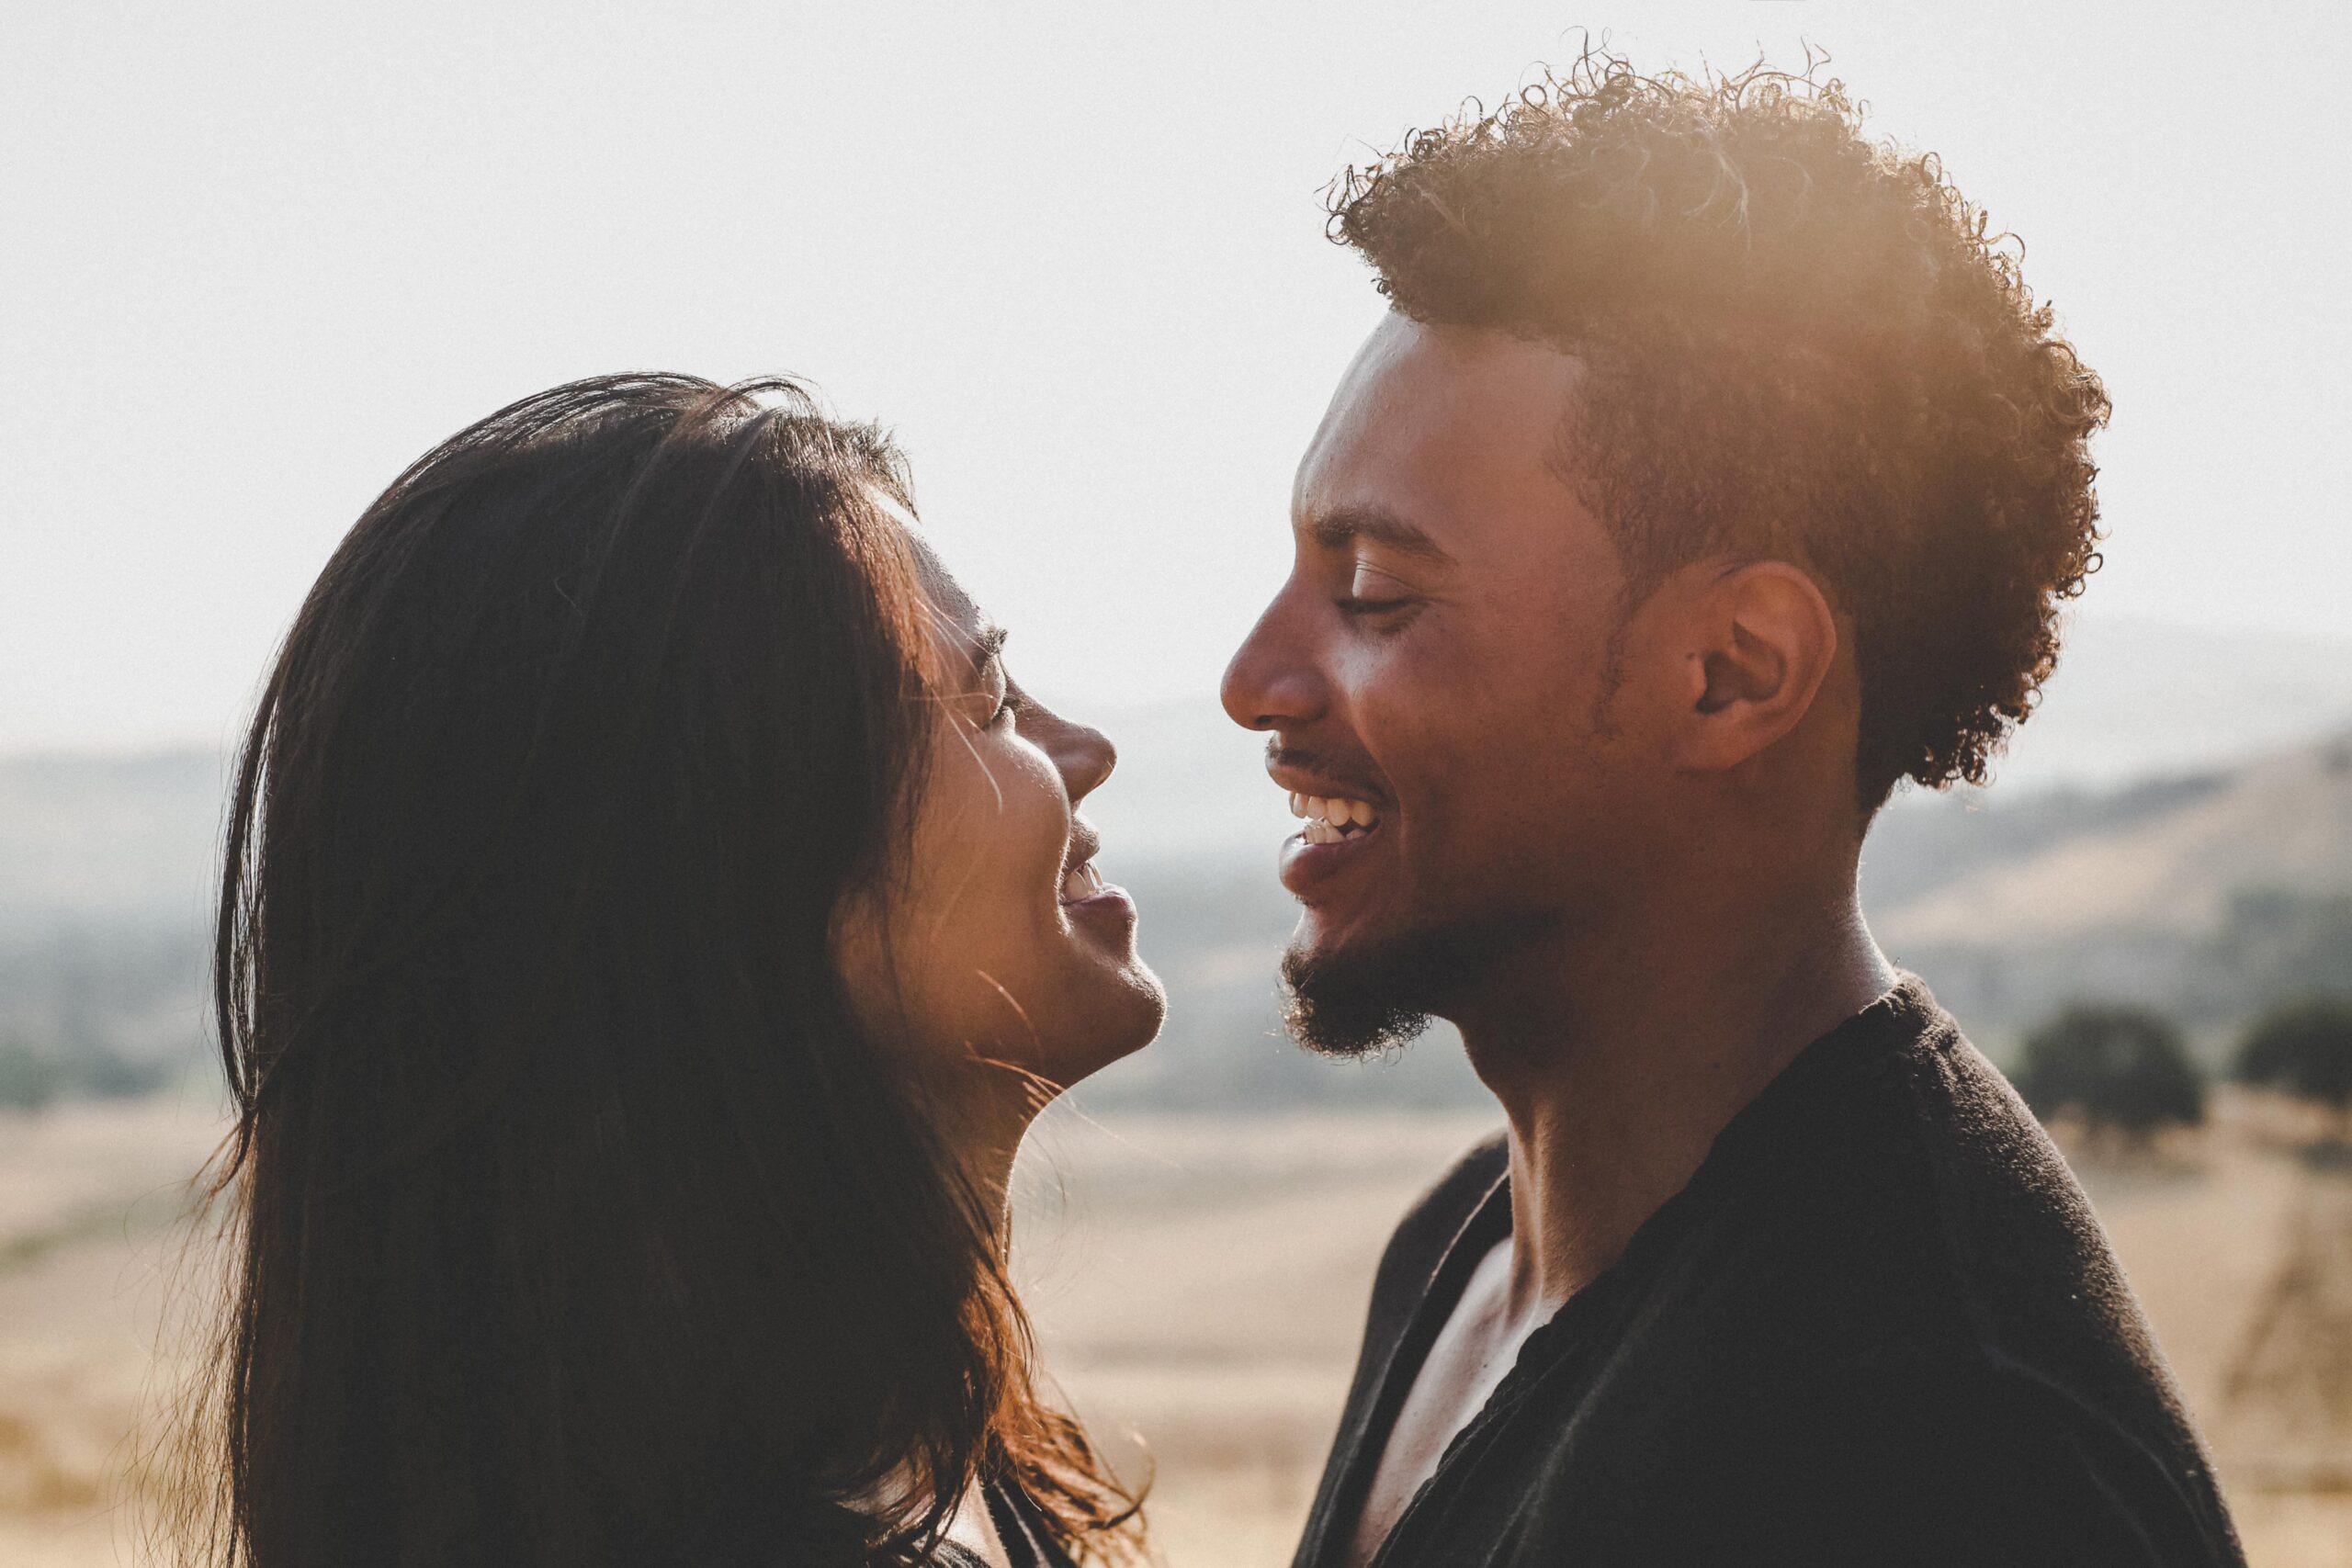 Are you too intelligent for your relationship?